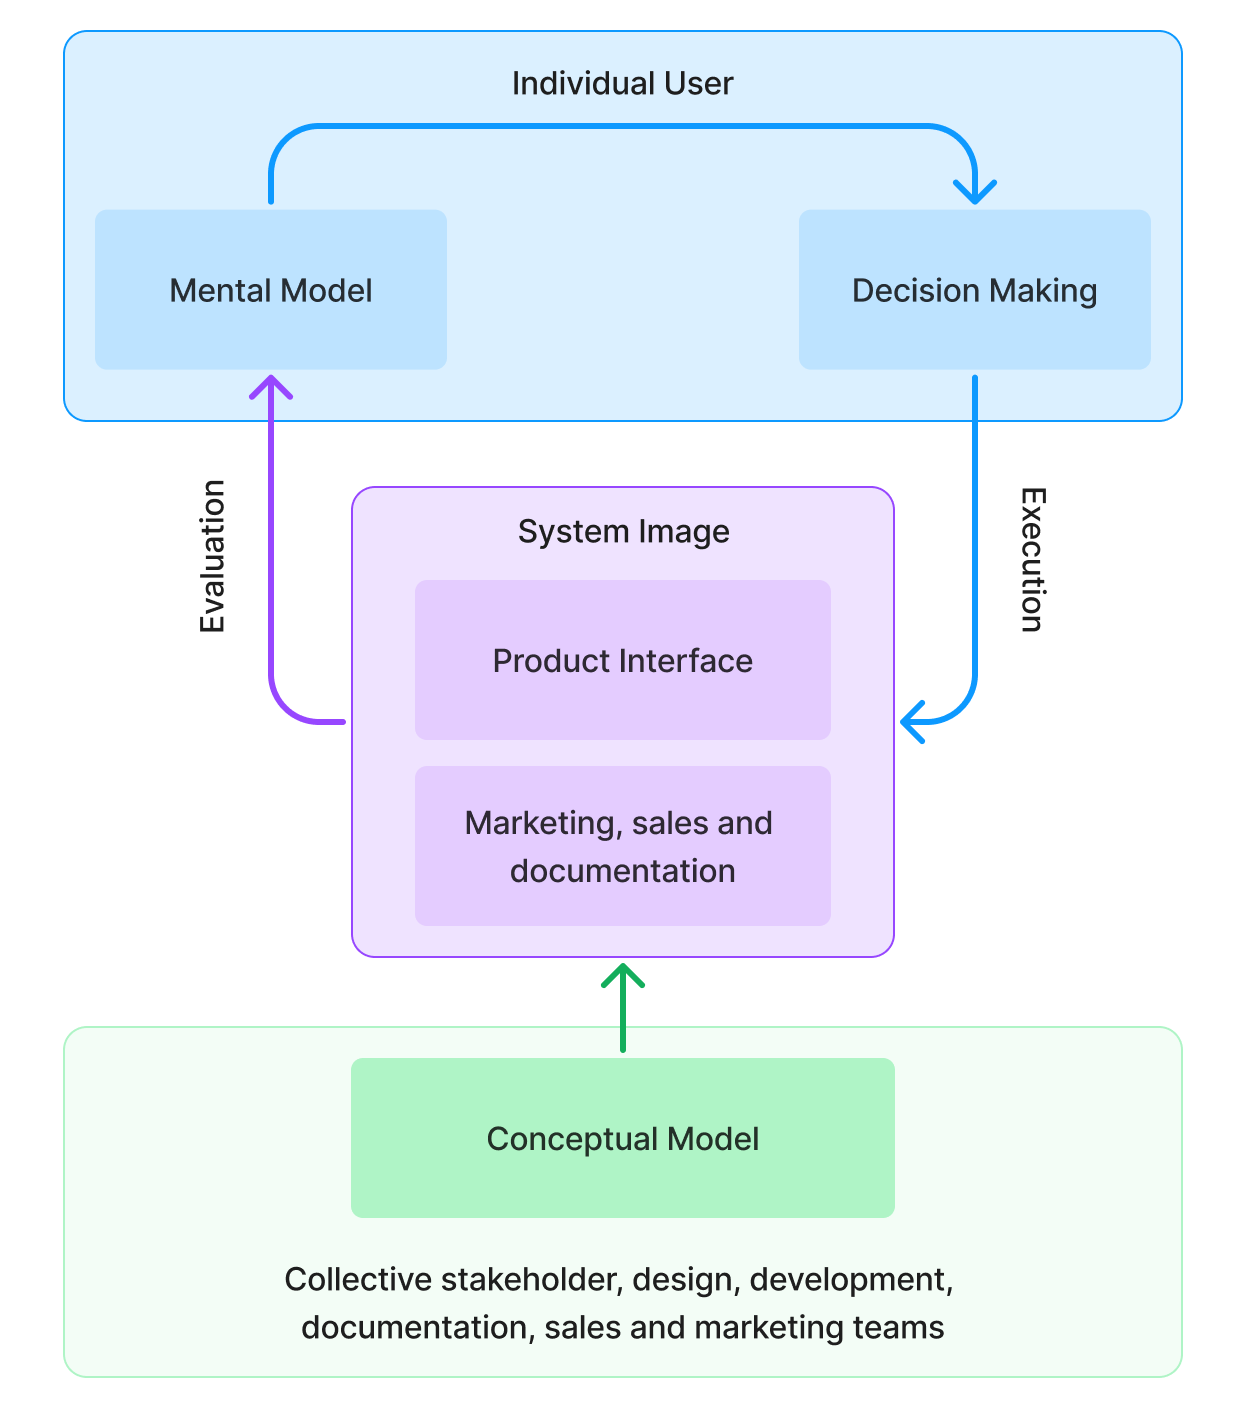 The relationship loop between user and system image, per the conceptual model of the designer.